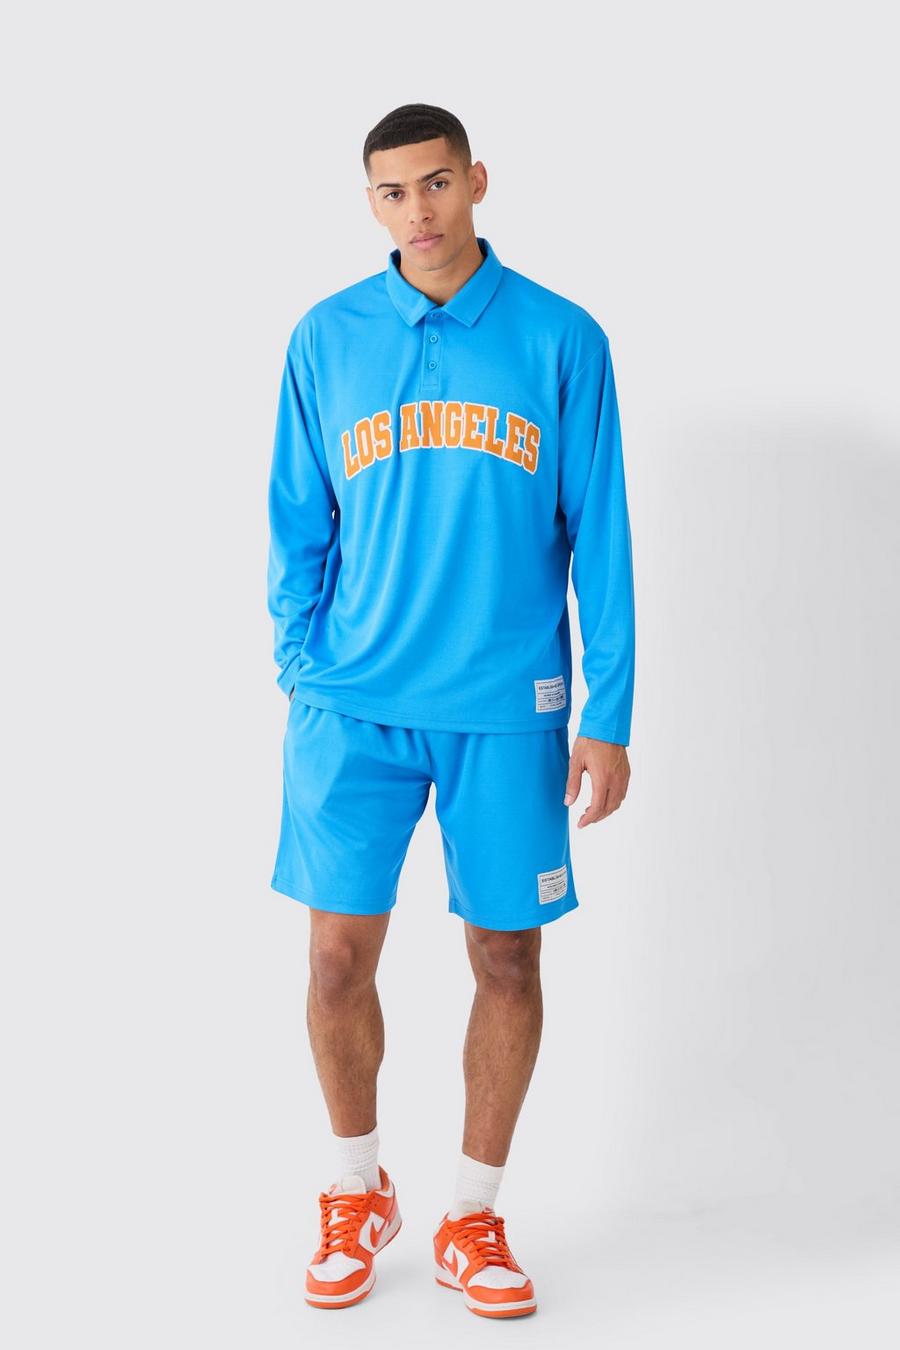 Blue Oversized Los Angeles Rugby Mesh Polo & Mesh Shorts Set